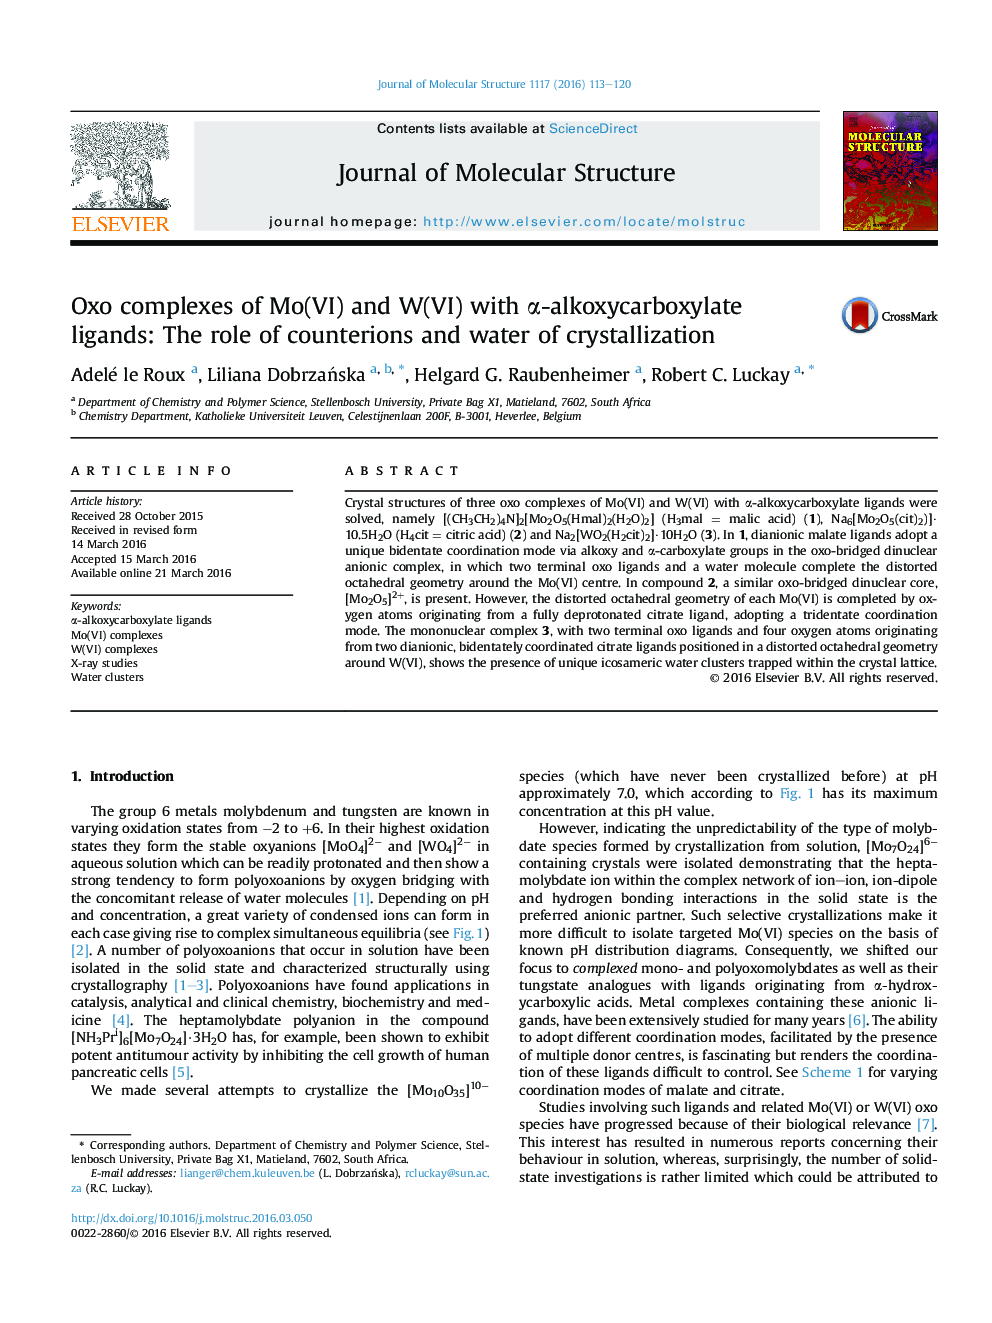 Oxo complexes of Mo(VI) and W(VI) with α-alkoxycarboxylate ligands: The role of counterions and water of crystallization